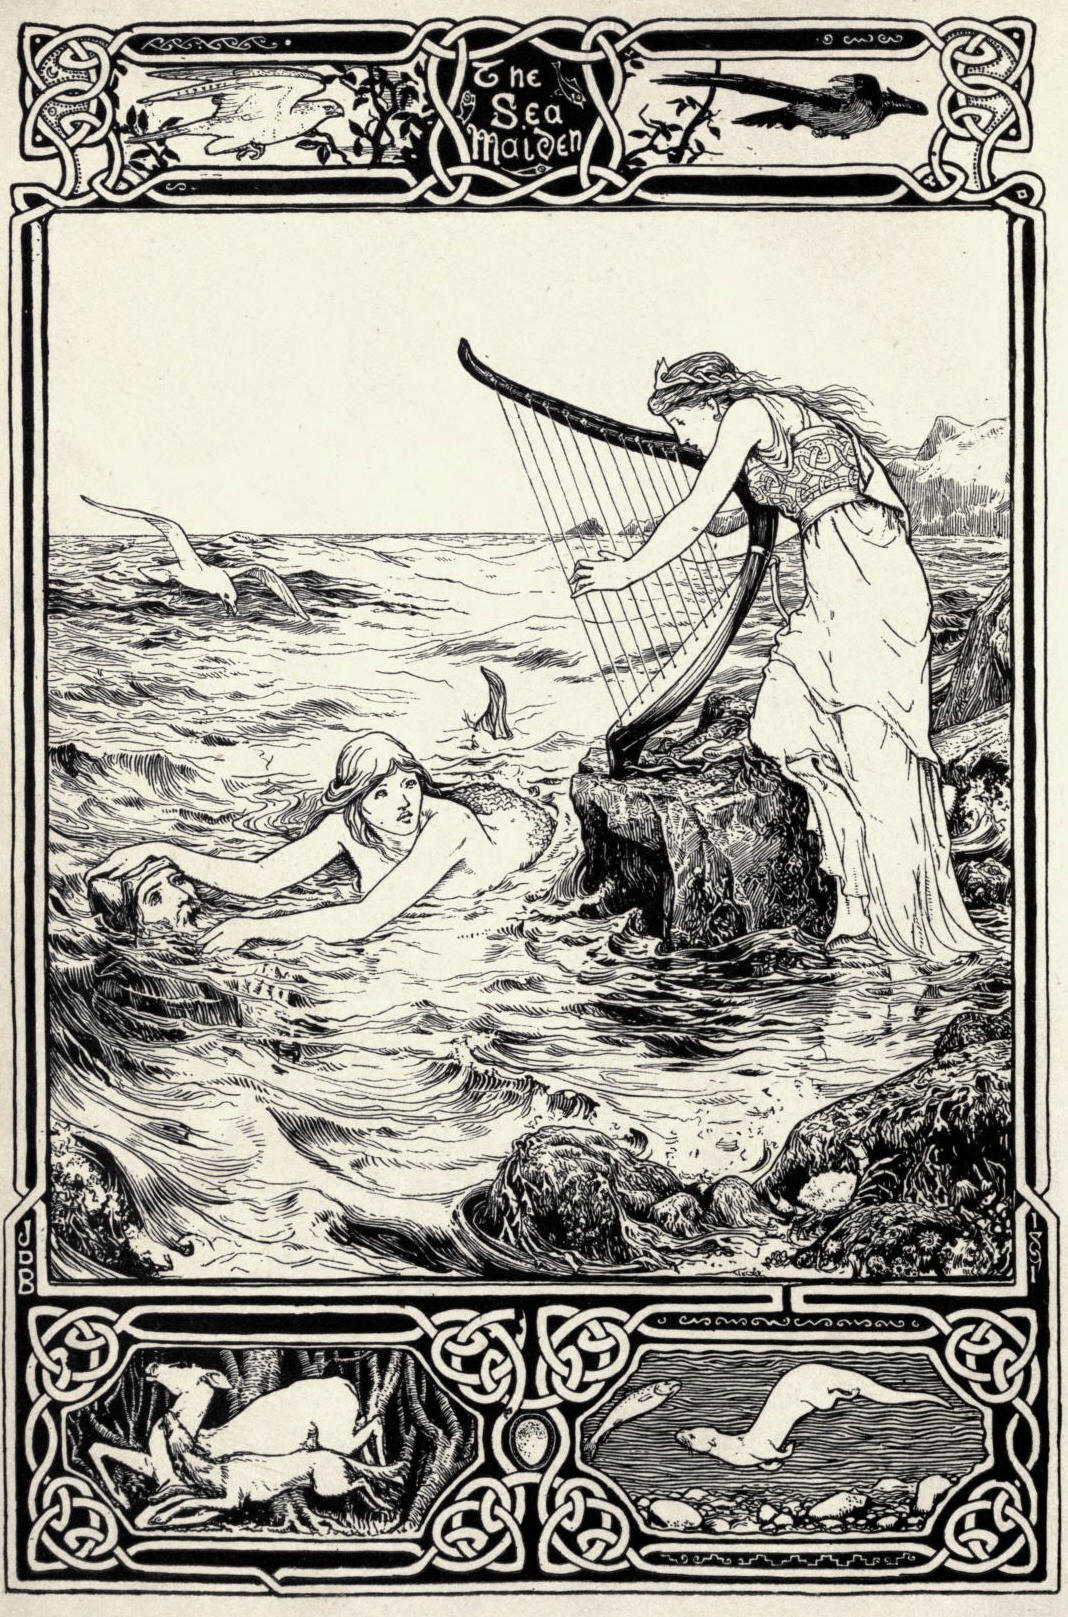 Celtic Fairy Tales: The Sea Maiden by John D. Batten https://archive.org/stream/celticfairytale00jacorich#page/n9/mode/1up